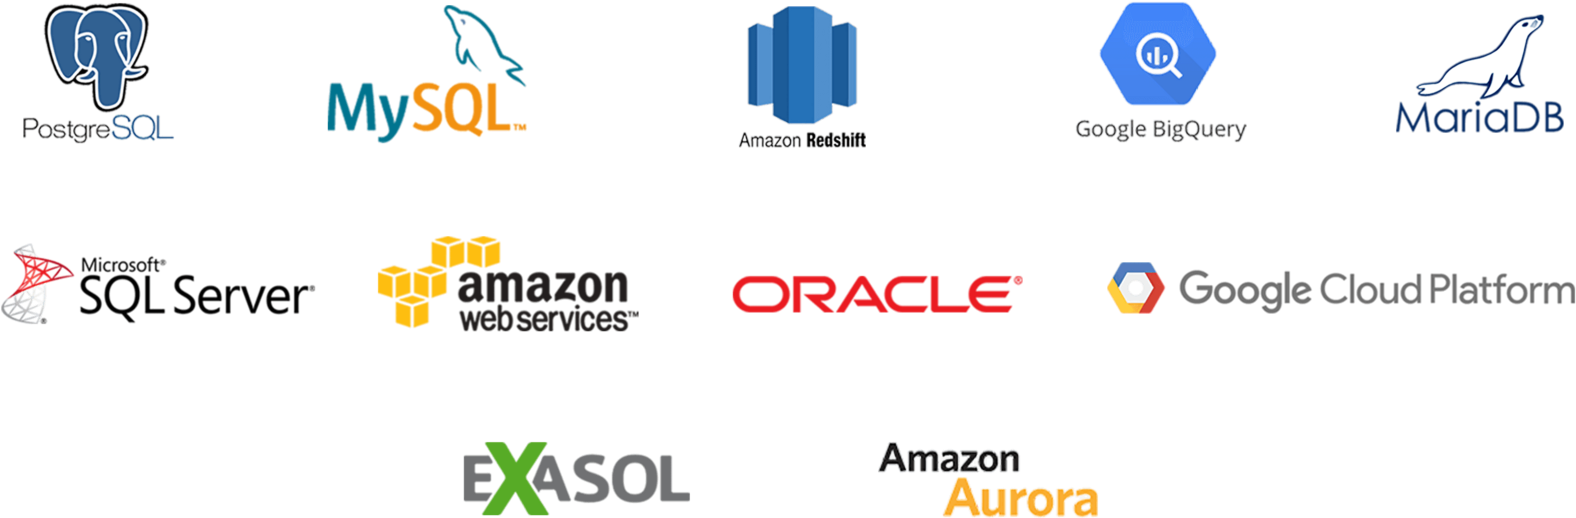 Google Cloudsql, Microsoft Sql Server, Oracle And Exasol, - Amazon Web Services Clipart (1600x555), Png Download